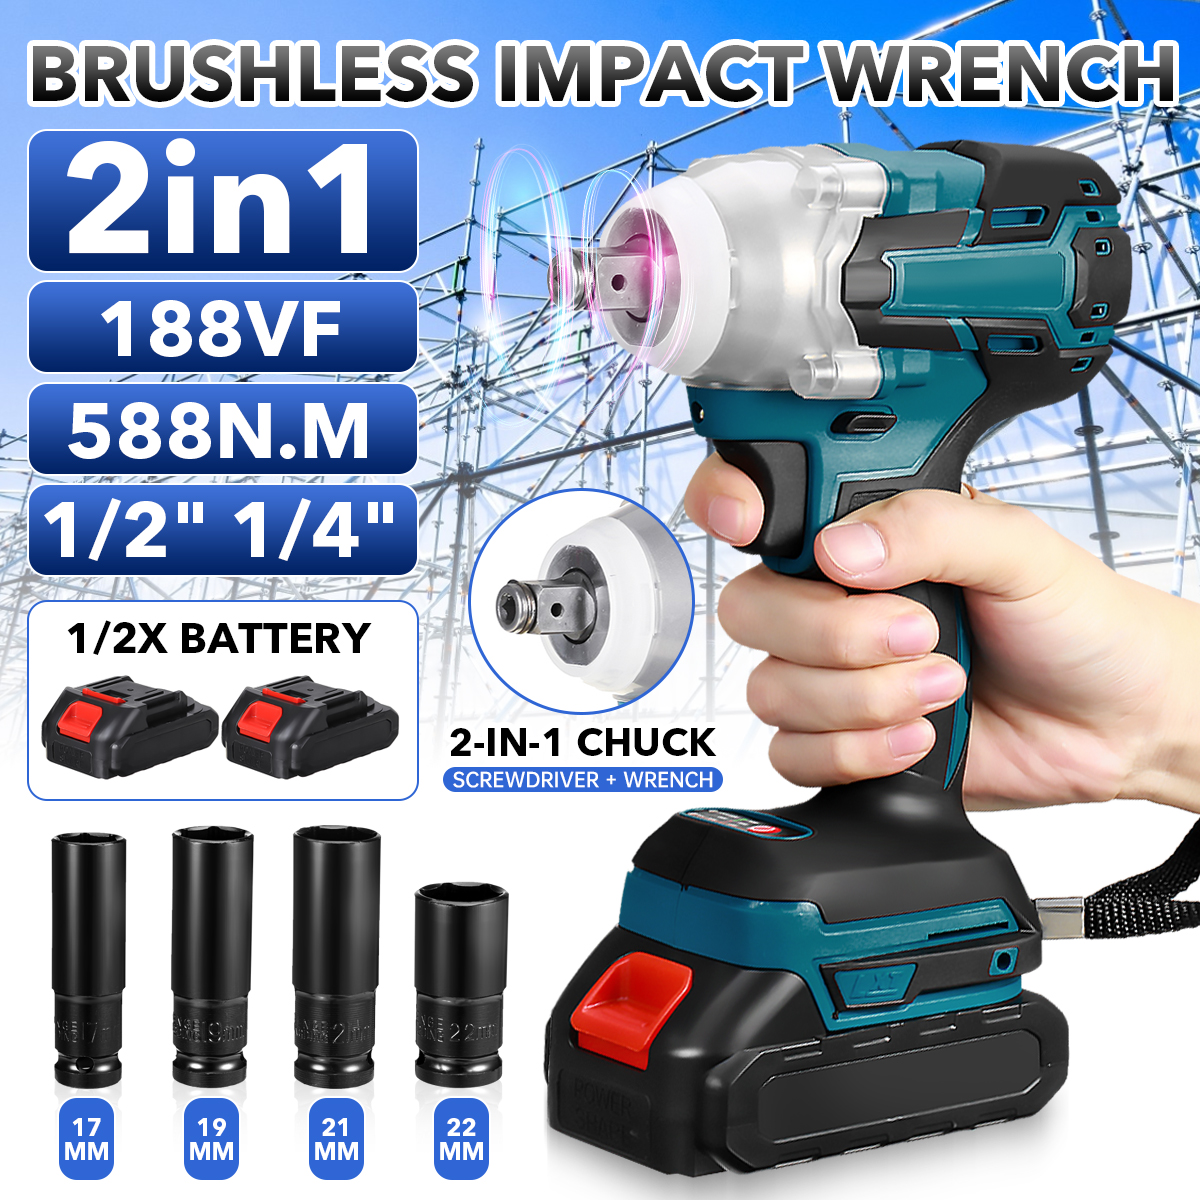 2-in-1-188VF-588Nm-Li-Ion-Brushless-Cordless-Electric-12quot-Wrench-14quotScrewdriver-Drill-W-12-Bat-1858198-1